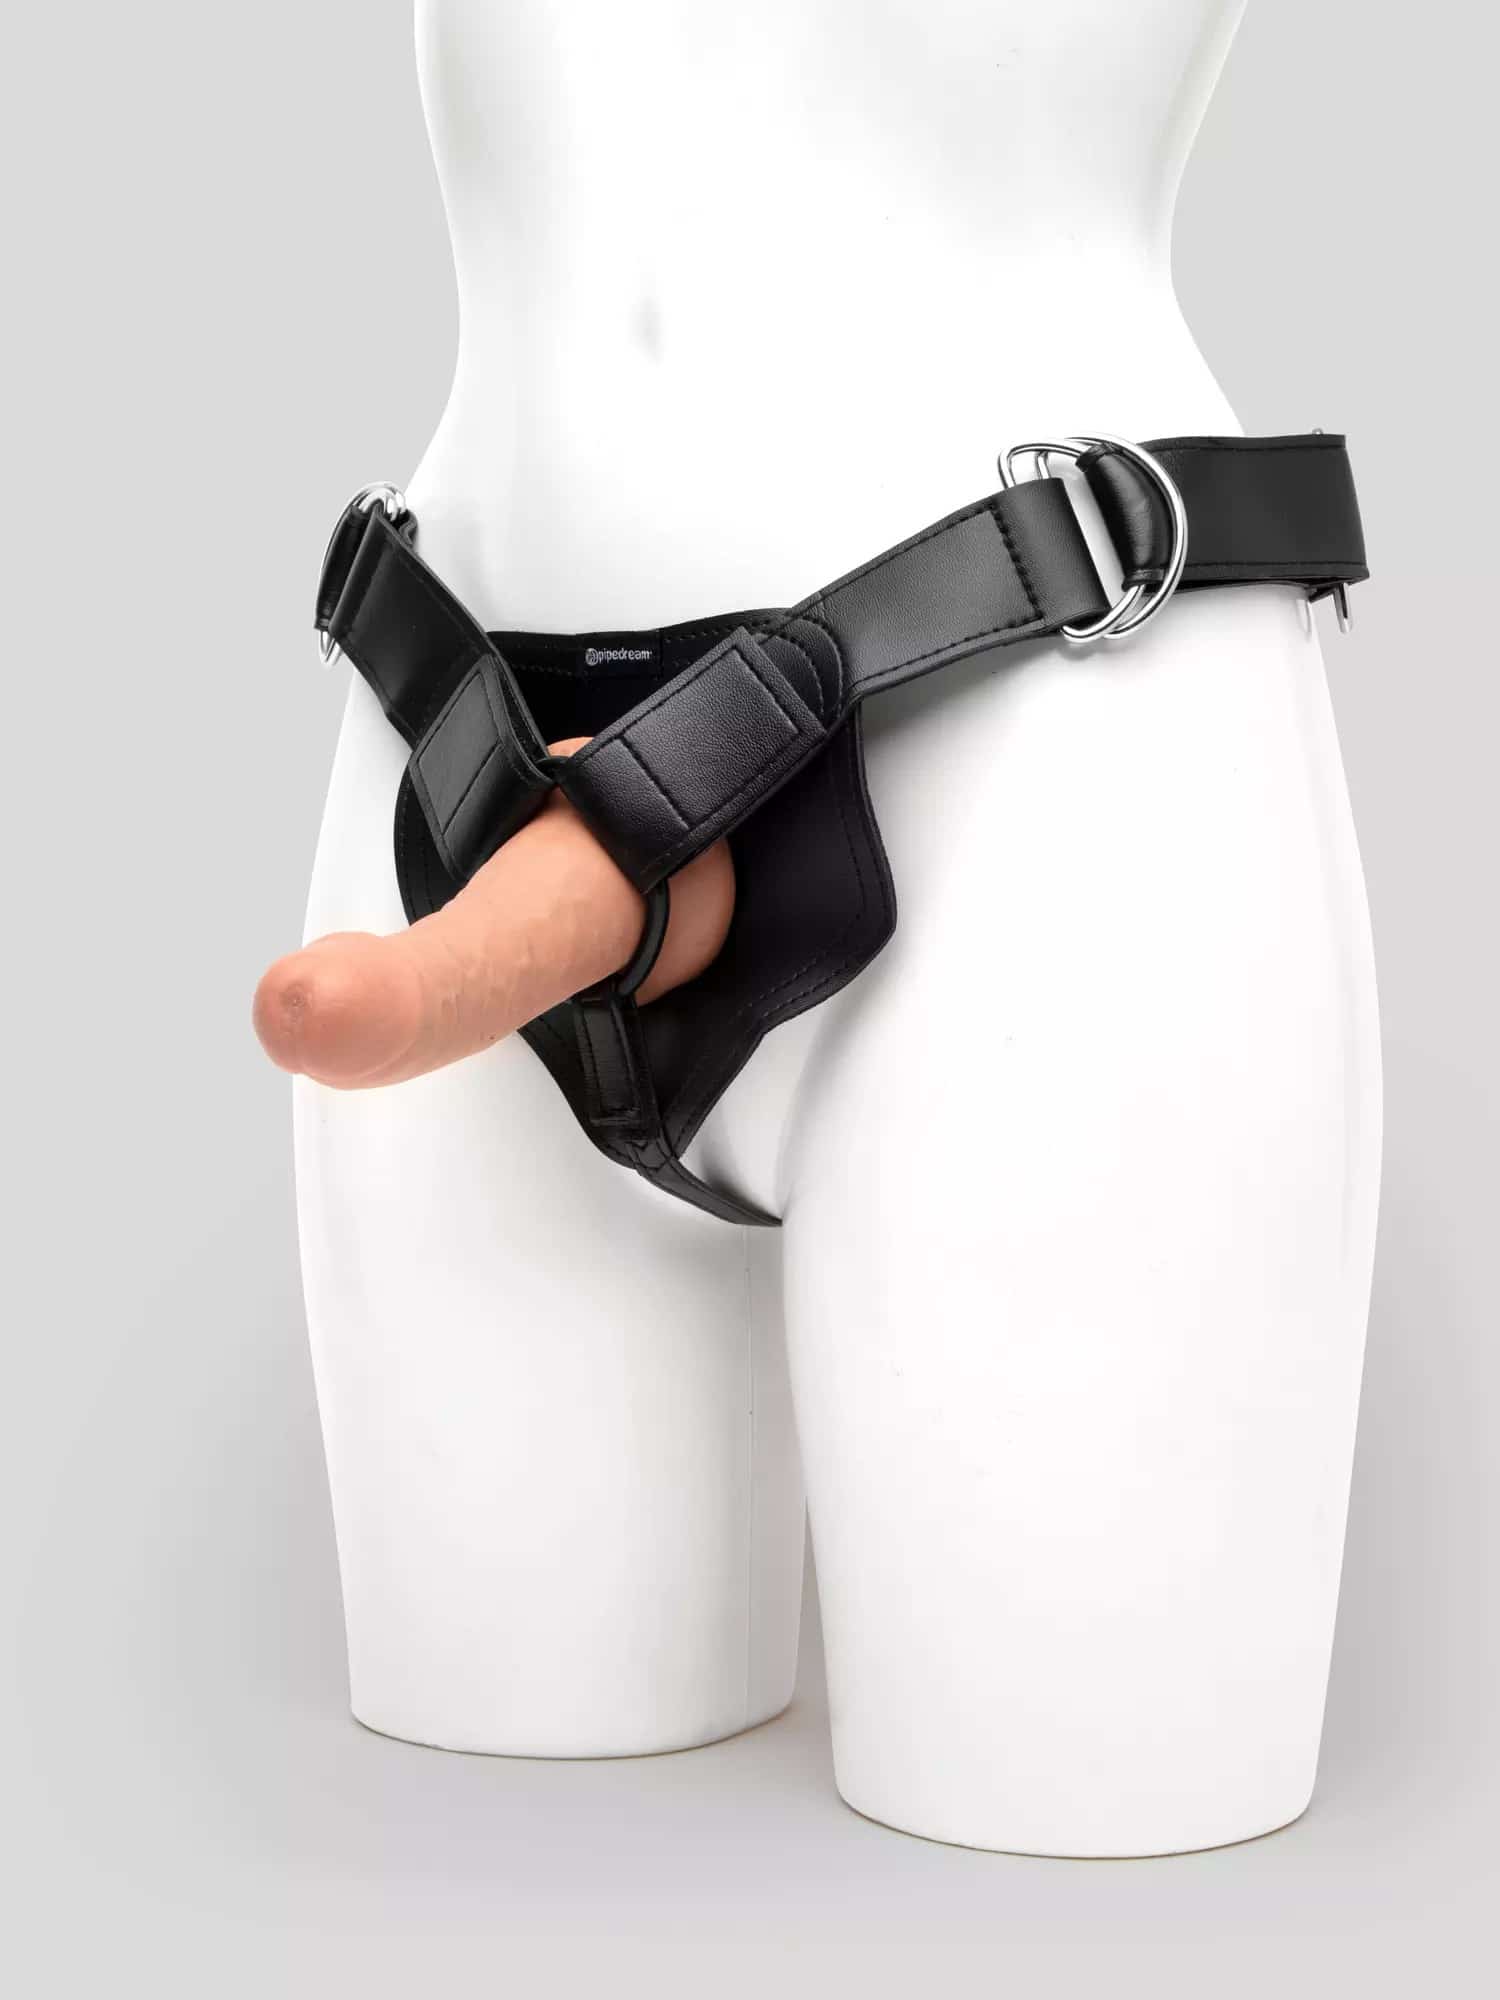 King Cock Strap-On Harness Kit with Ultra Realistic Dildo. Slide 1